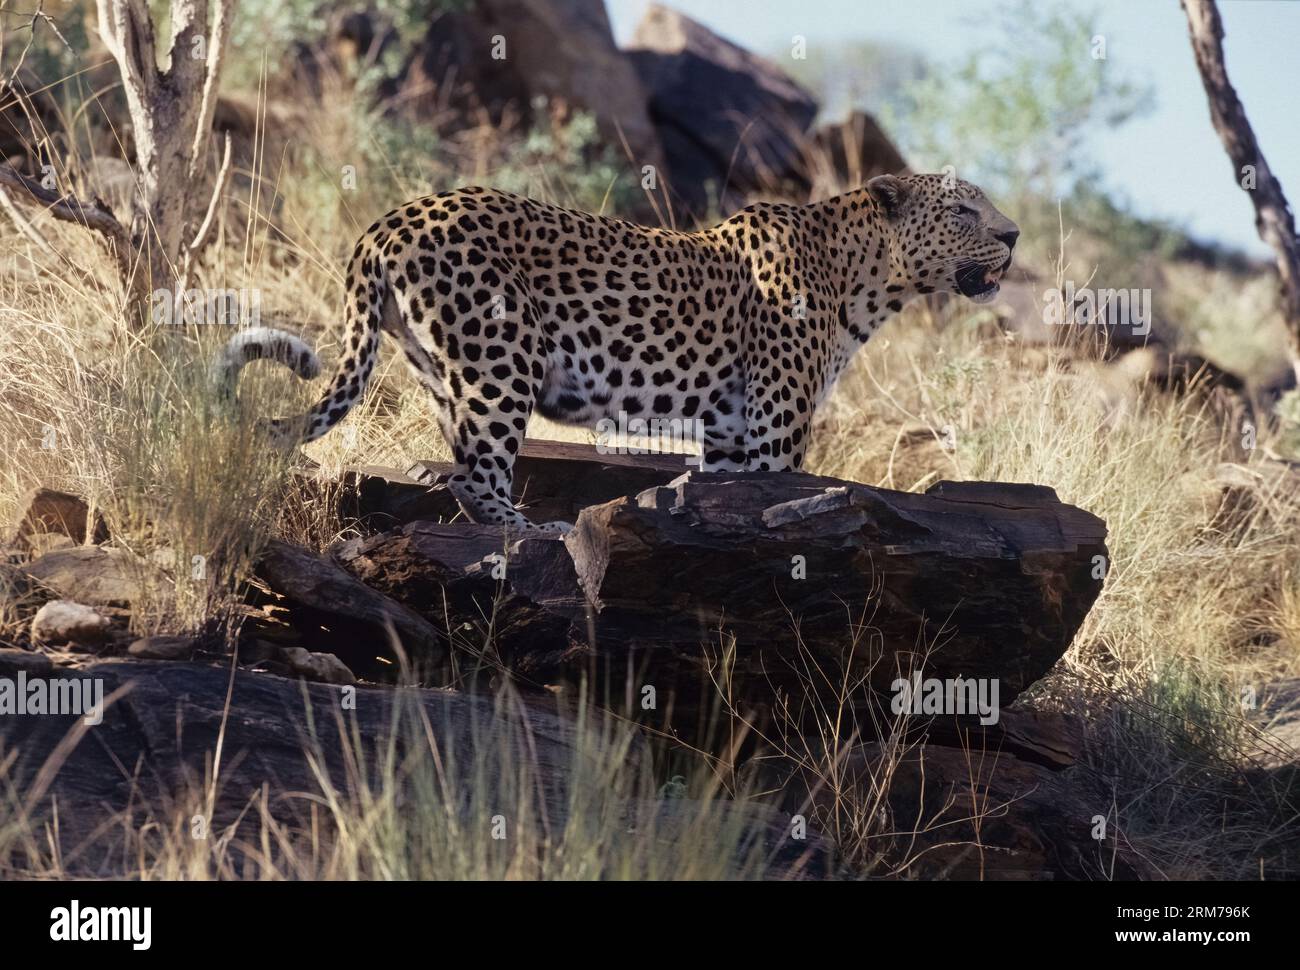 The African leopard (Panthera pardus pardus) is the nominate subspecies of the leopard, native to many countries in Africa. Stock Photo